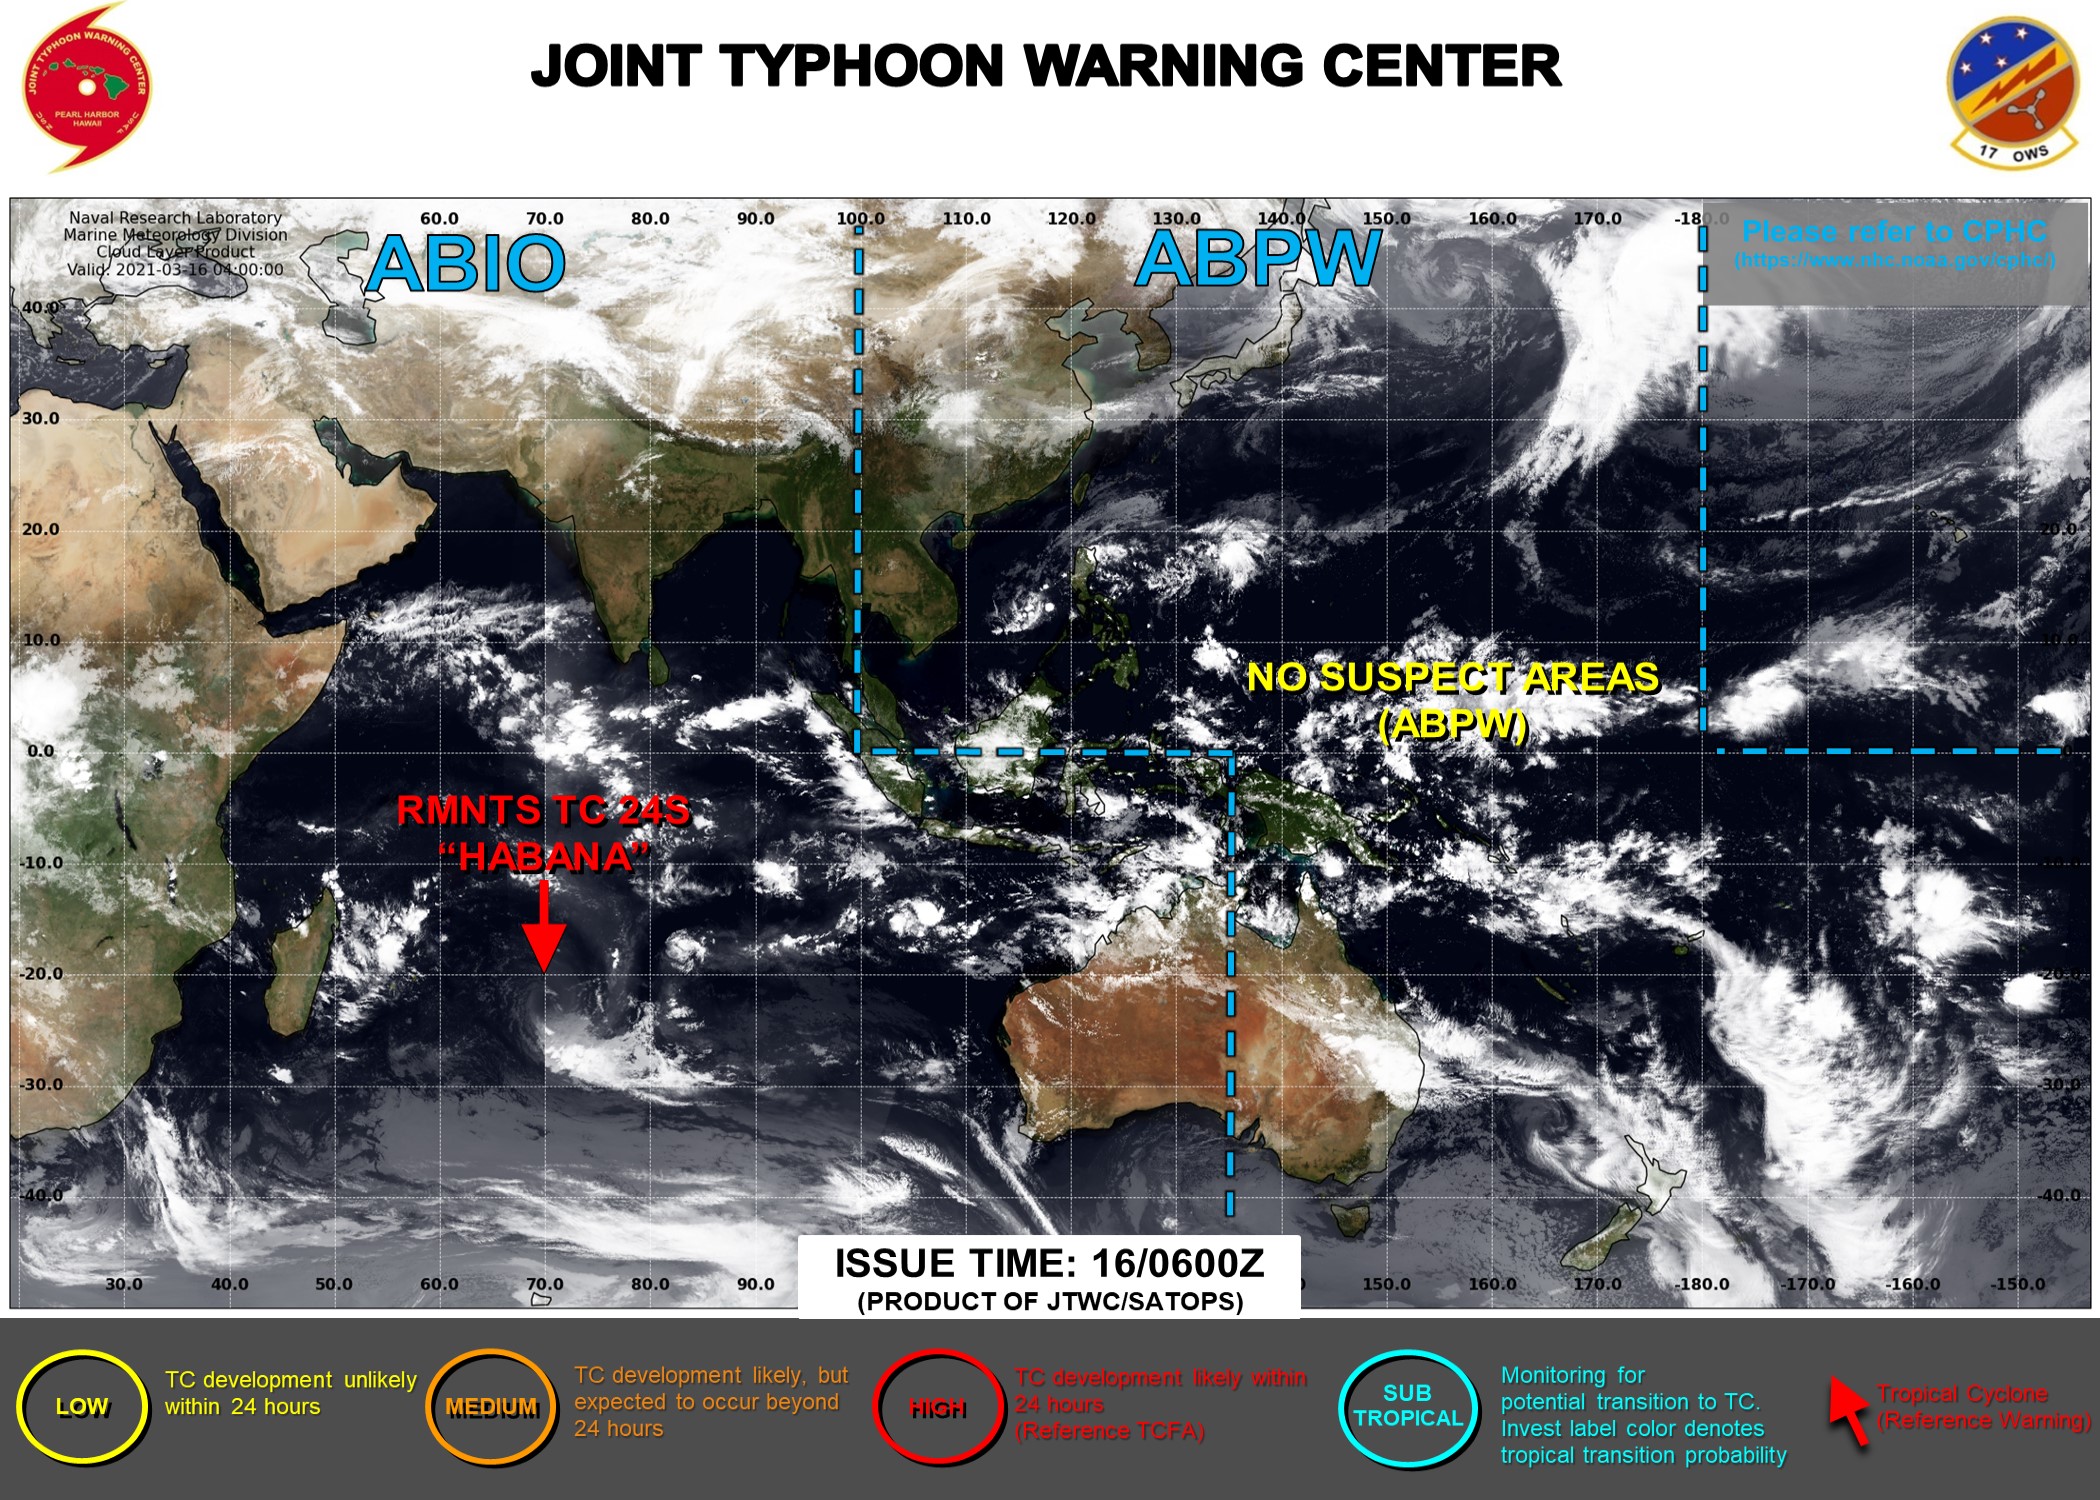 16/09UTC. JTWC IS ISSUING 3HOURLY SATELLITE BULLETINS ON 24S(HABANA). FINAL 12HOURLY WARNING WAS ISSUED AT 15/21UTC.